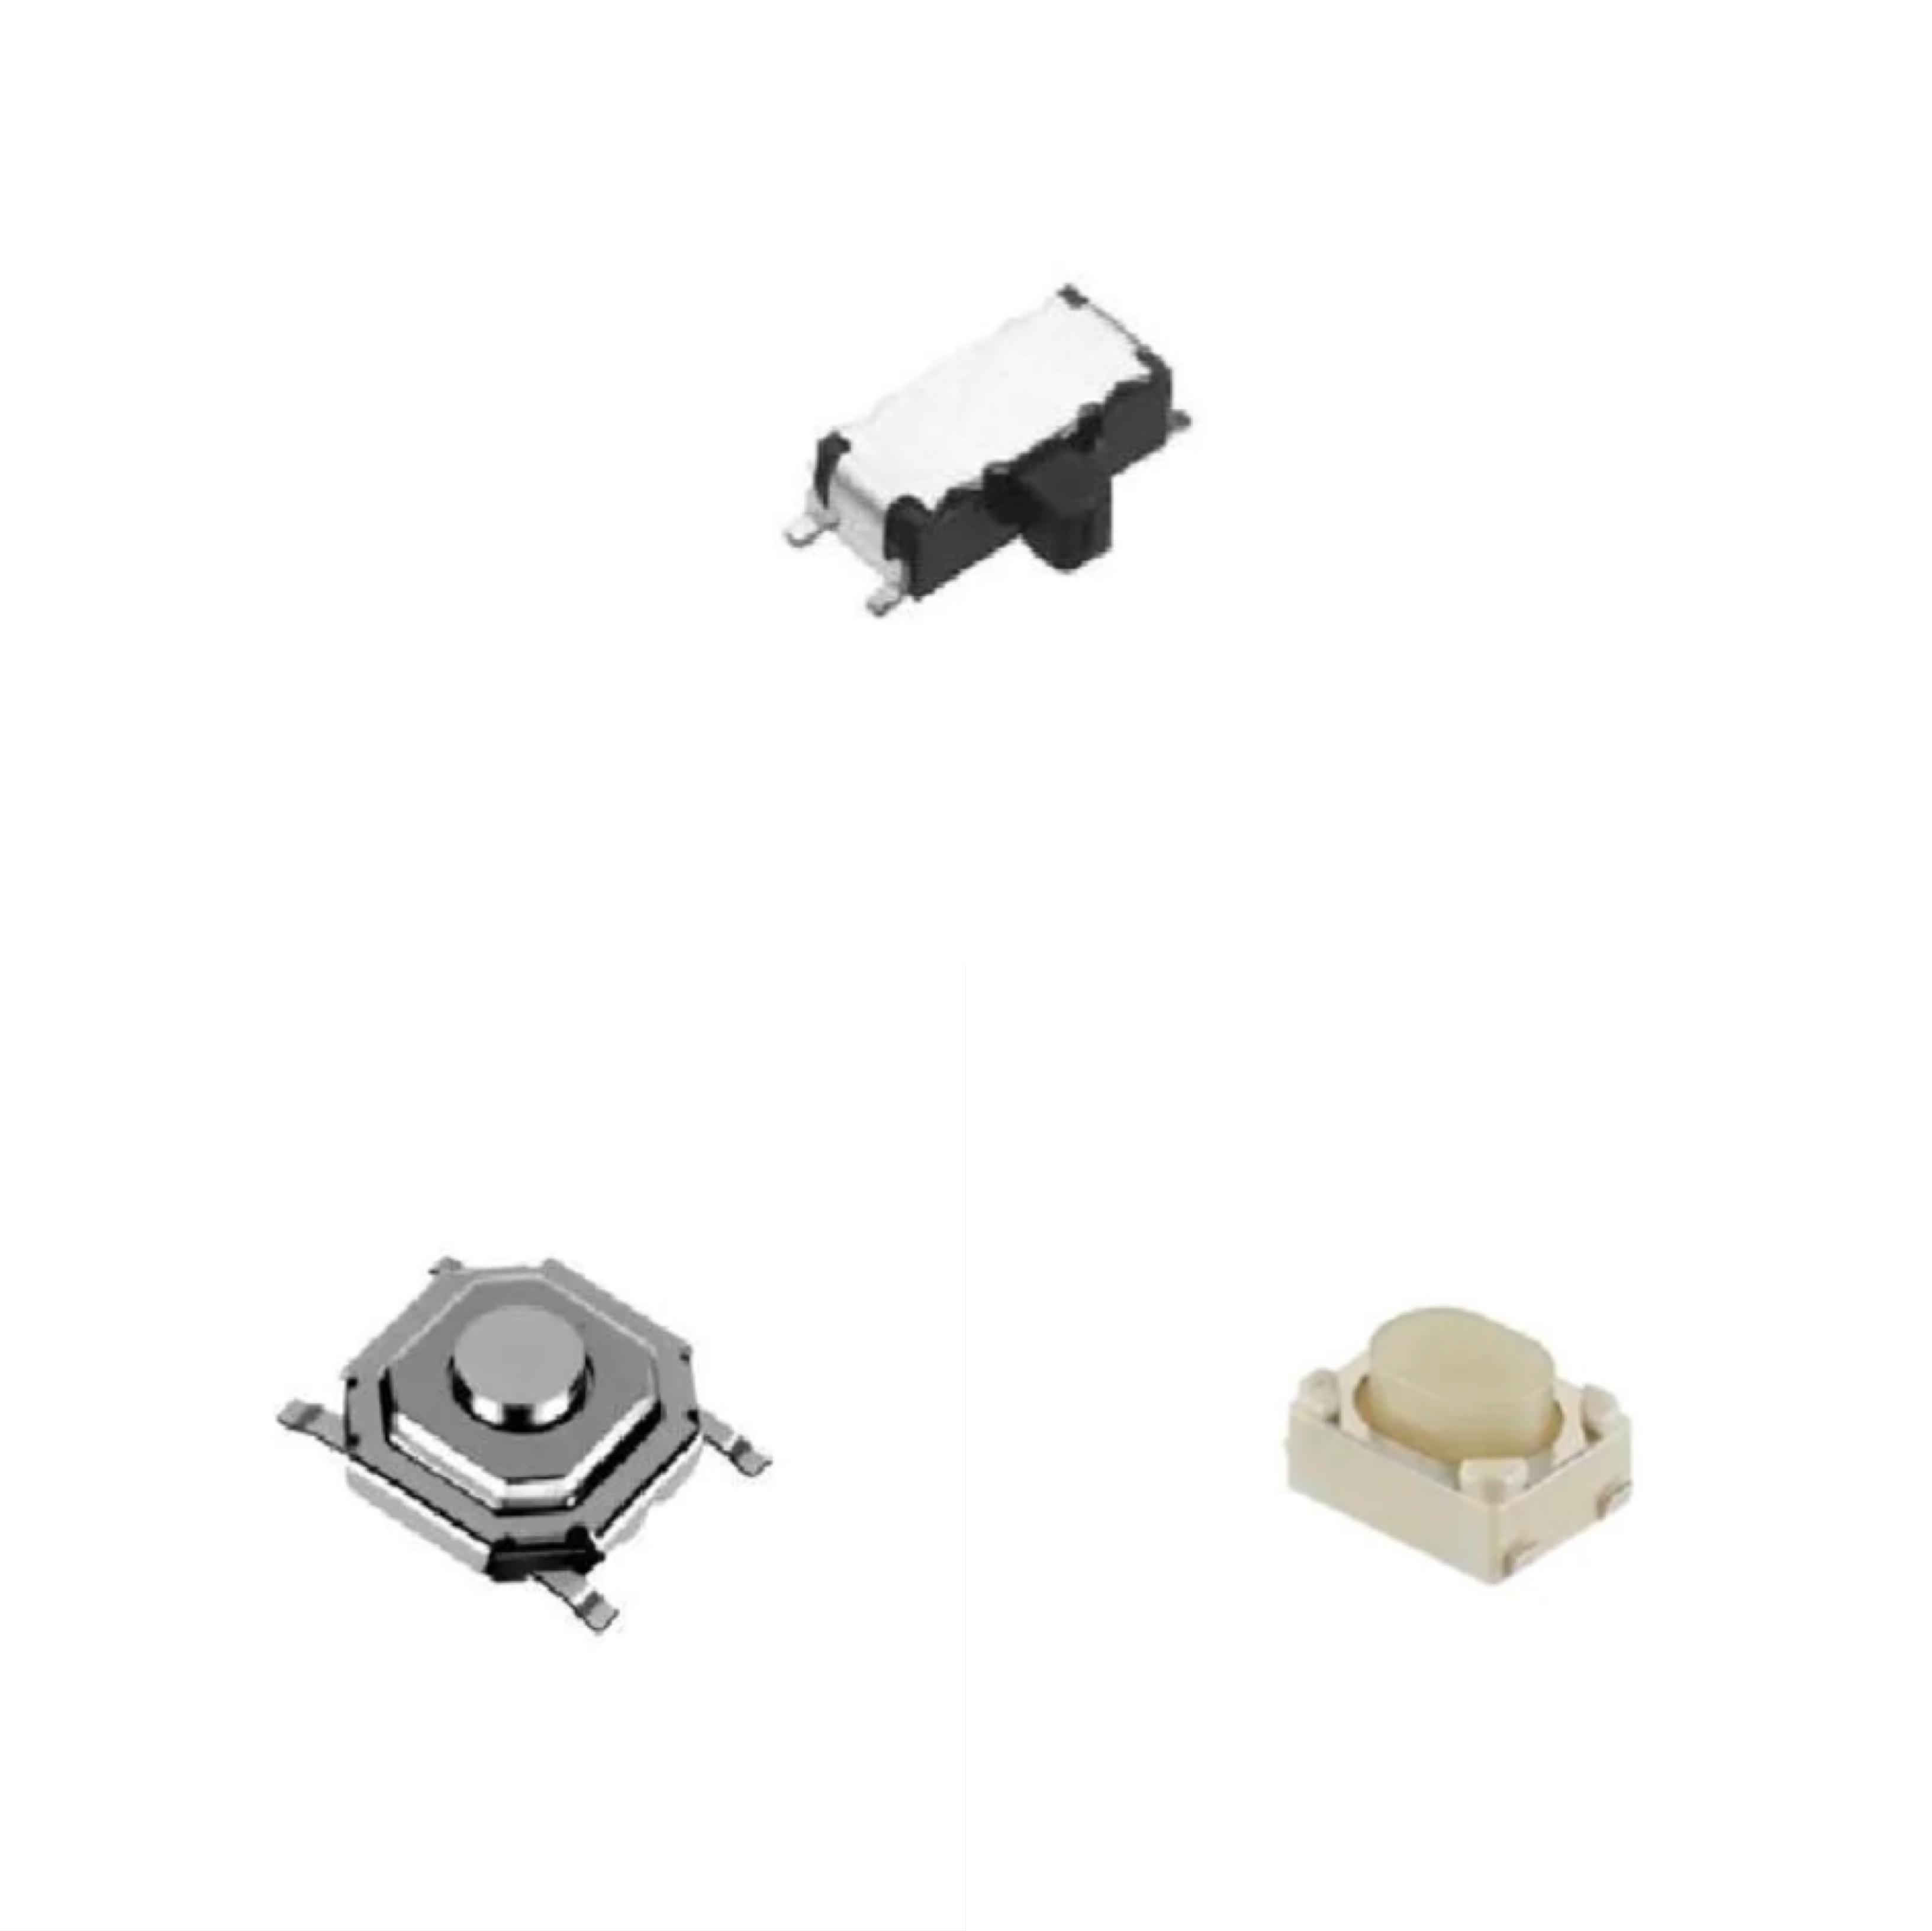 OEM/ODM China Microphones - SKHHLSA010 6.20mm x 6.20mm  x 8.35mm The side buttons  SPST 50mA   12VDC Side operation Round Button TThrough Hole Tactile Switches RoHS – Ronghua